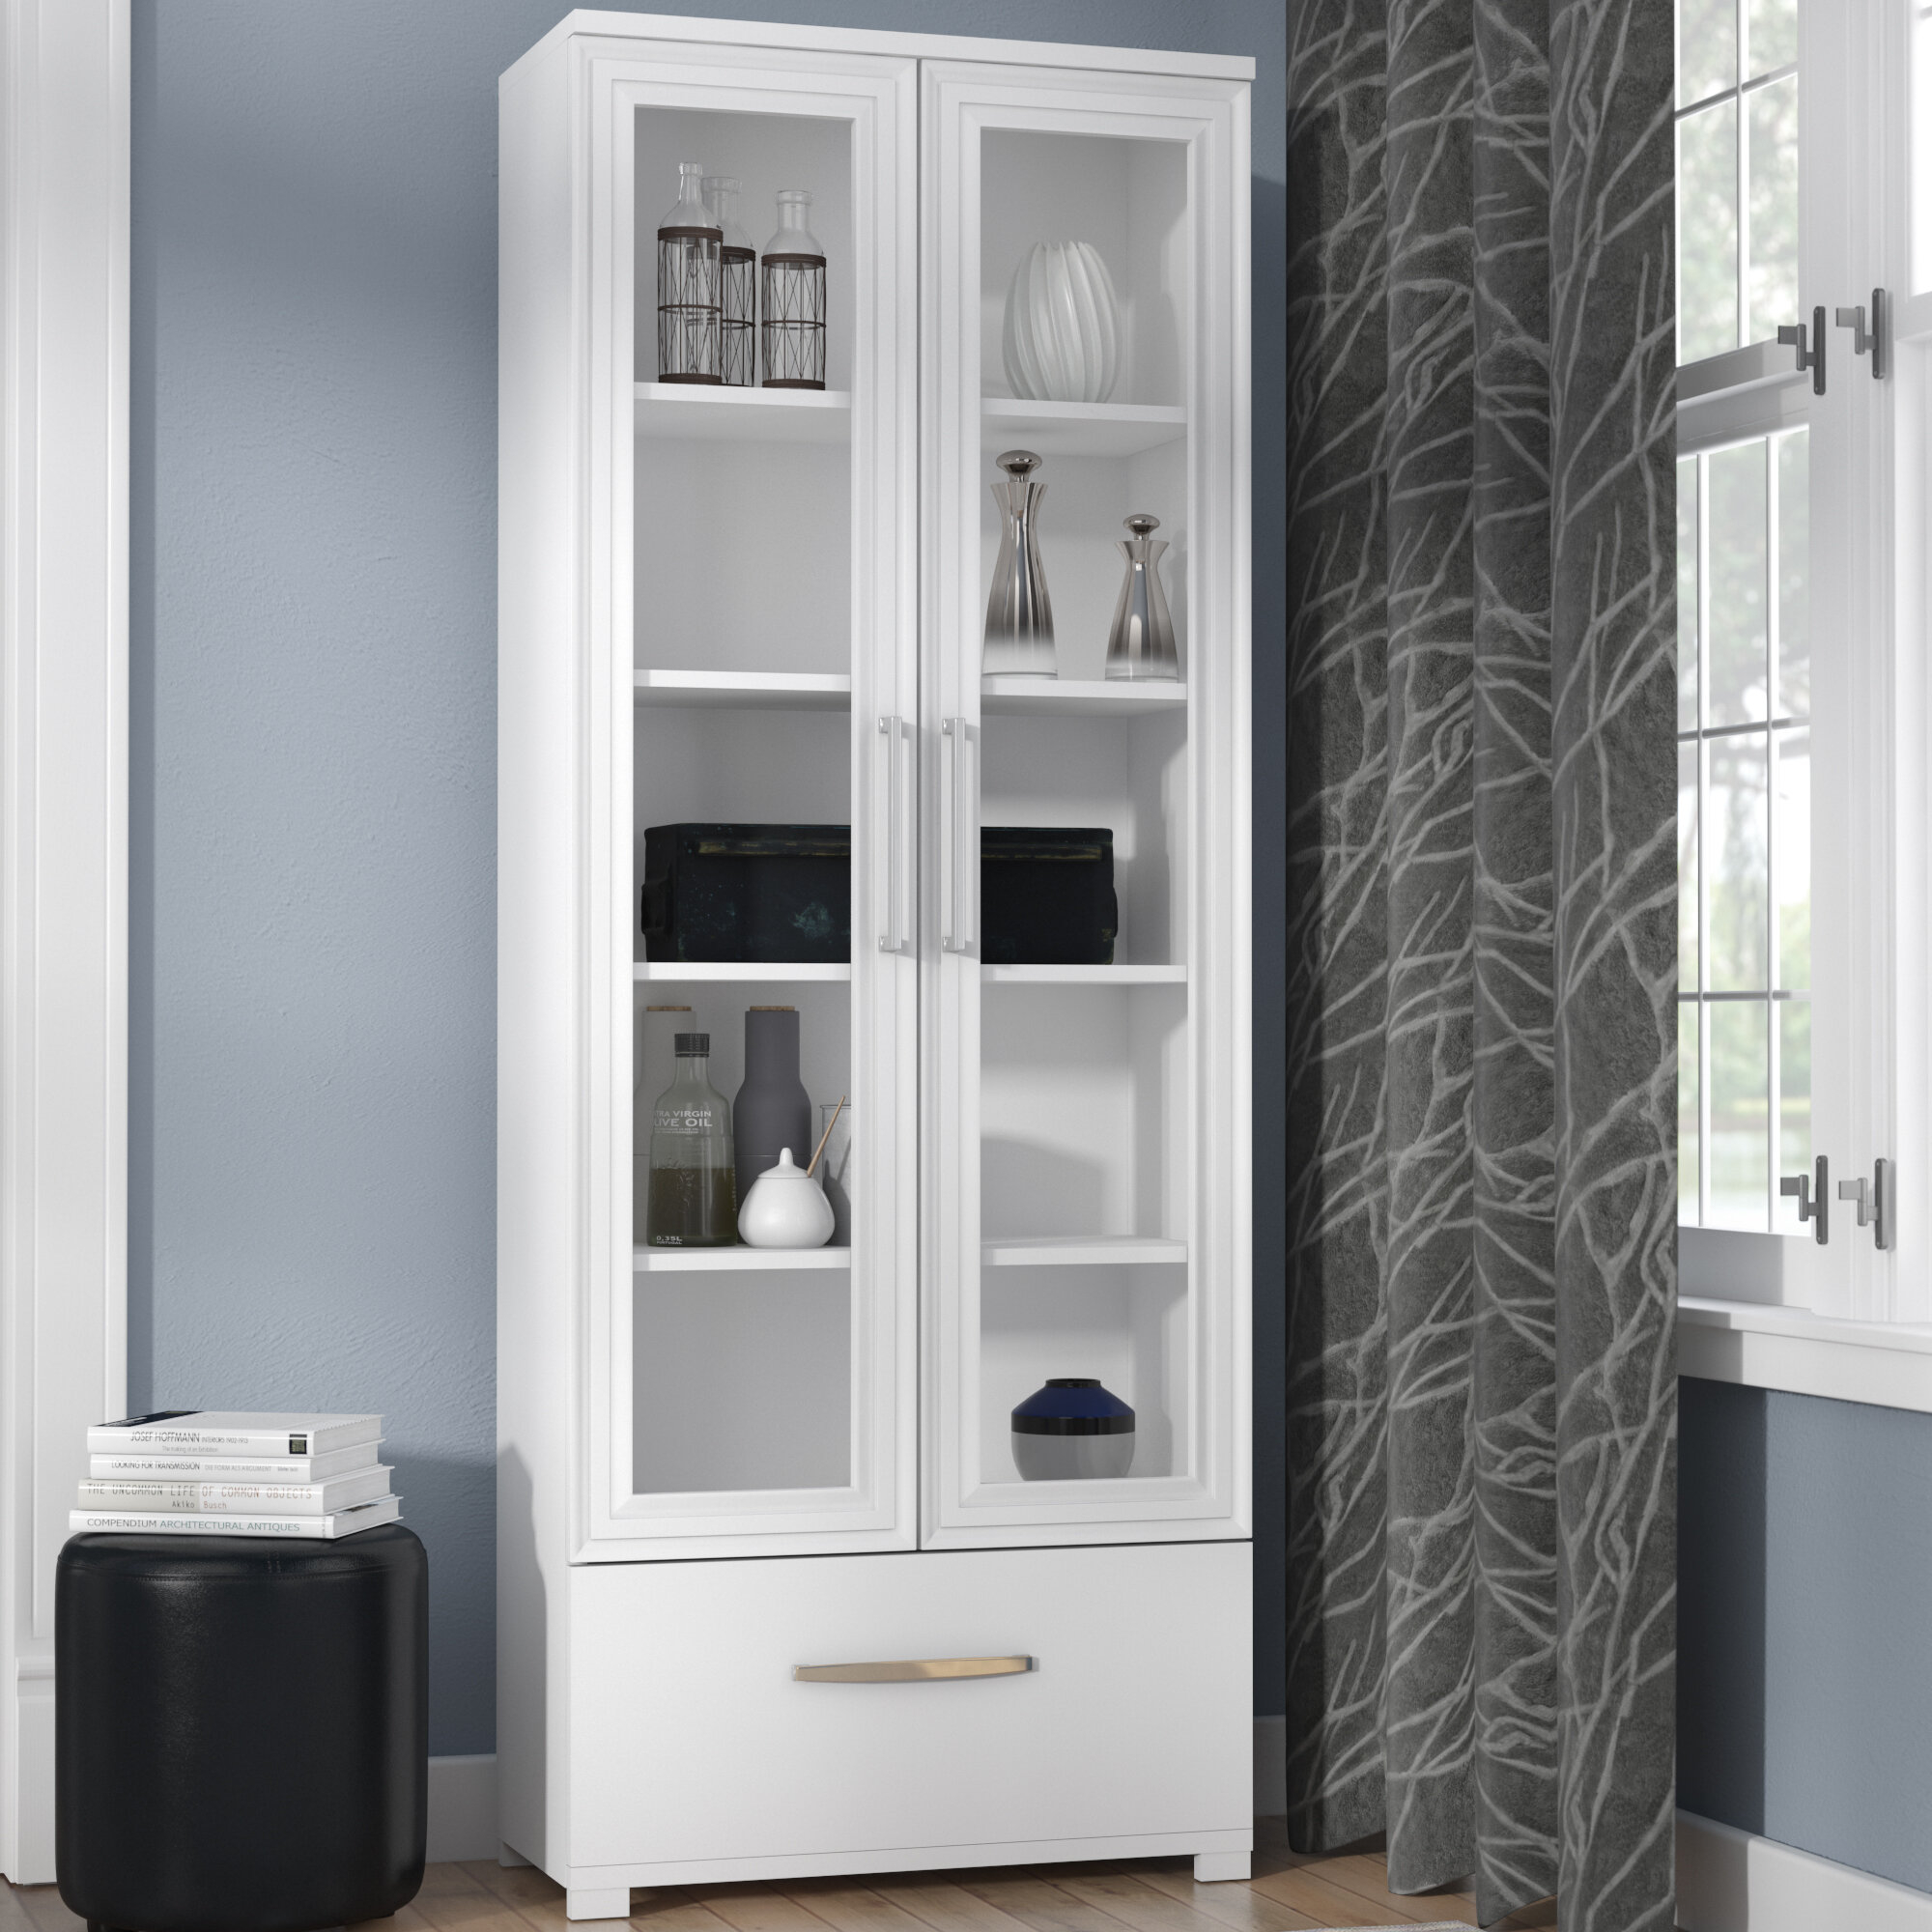 Bookcase With Glass Doors Visualhunt, Narrow White Bookcase With Glass Doors